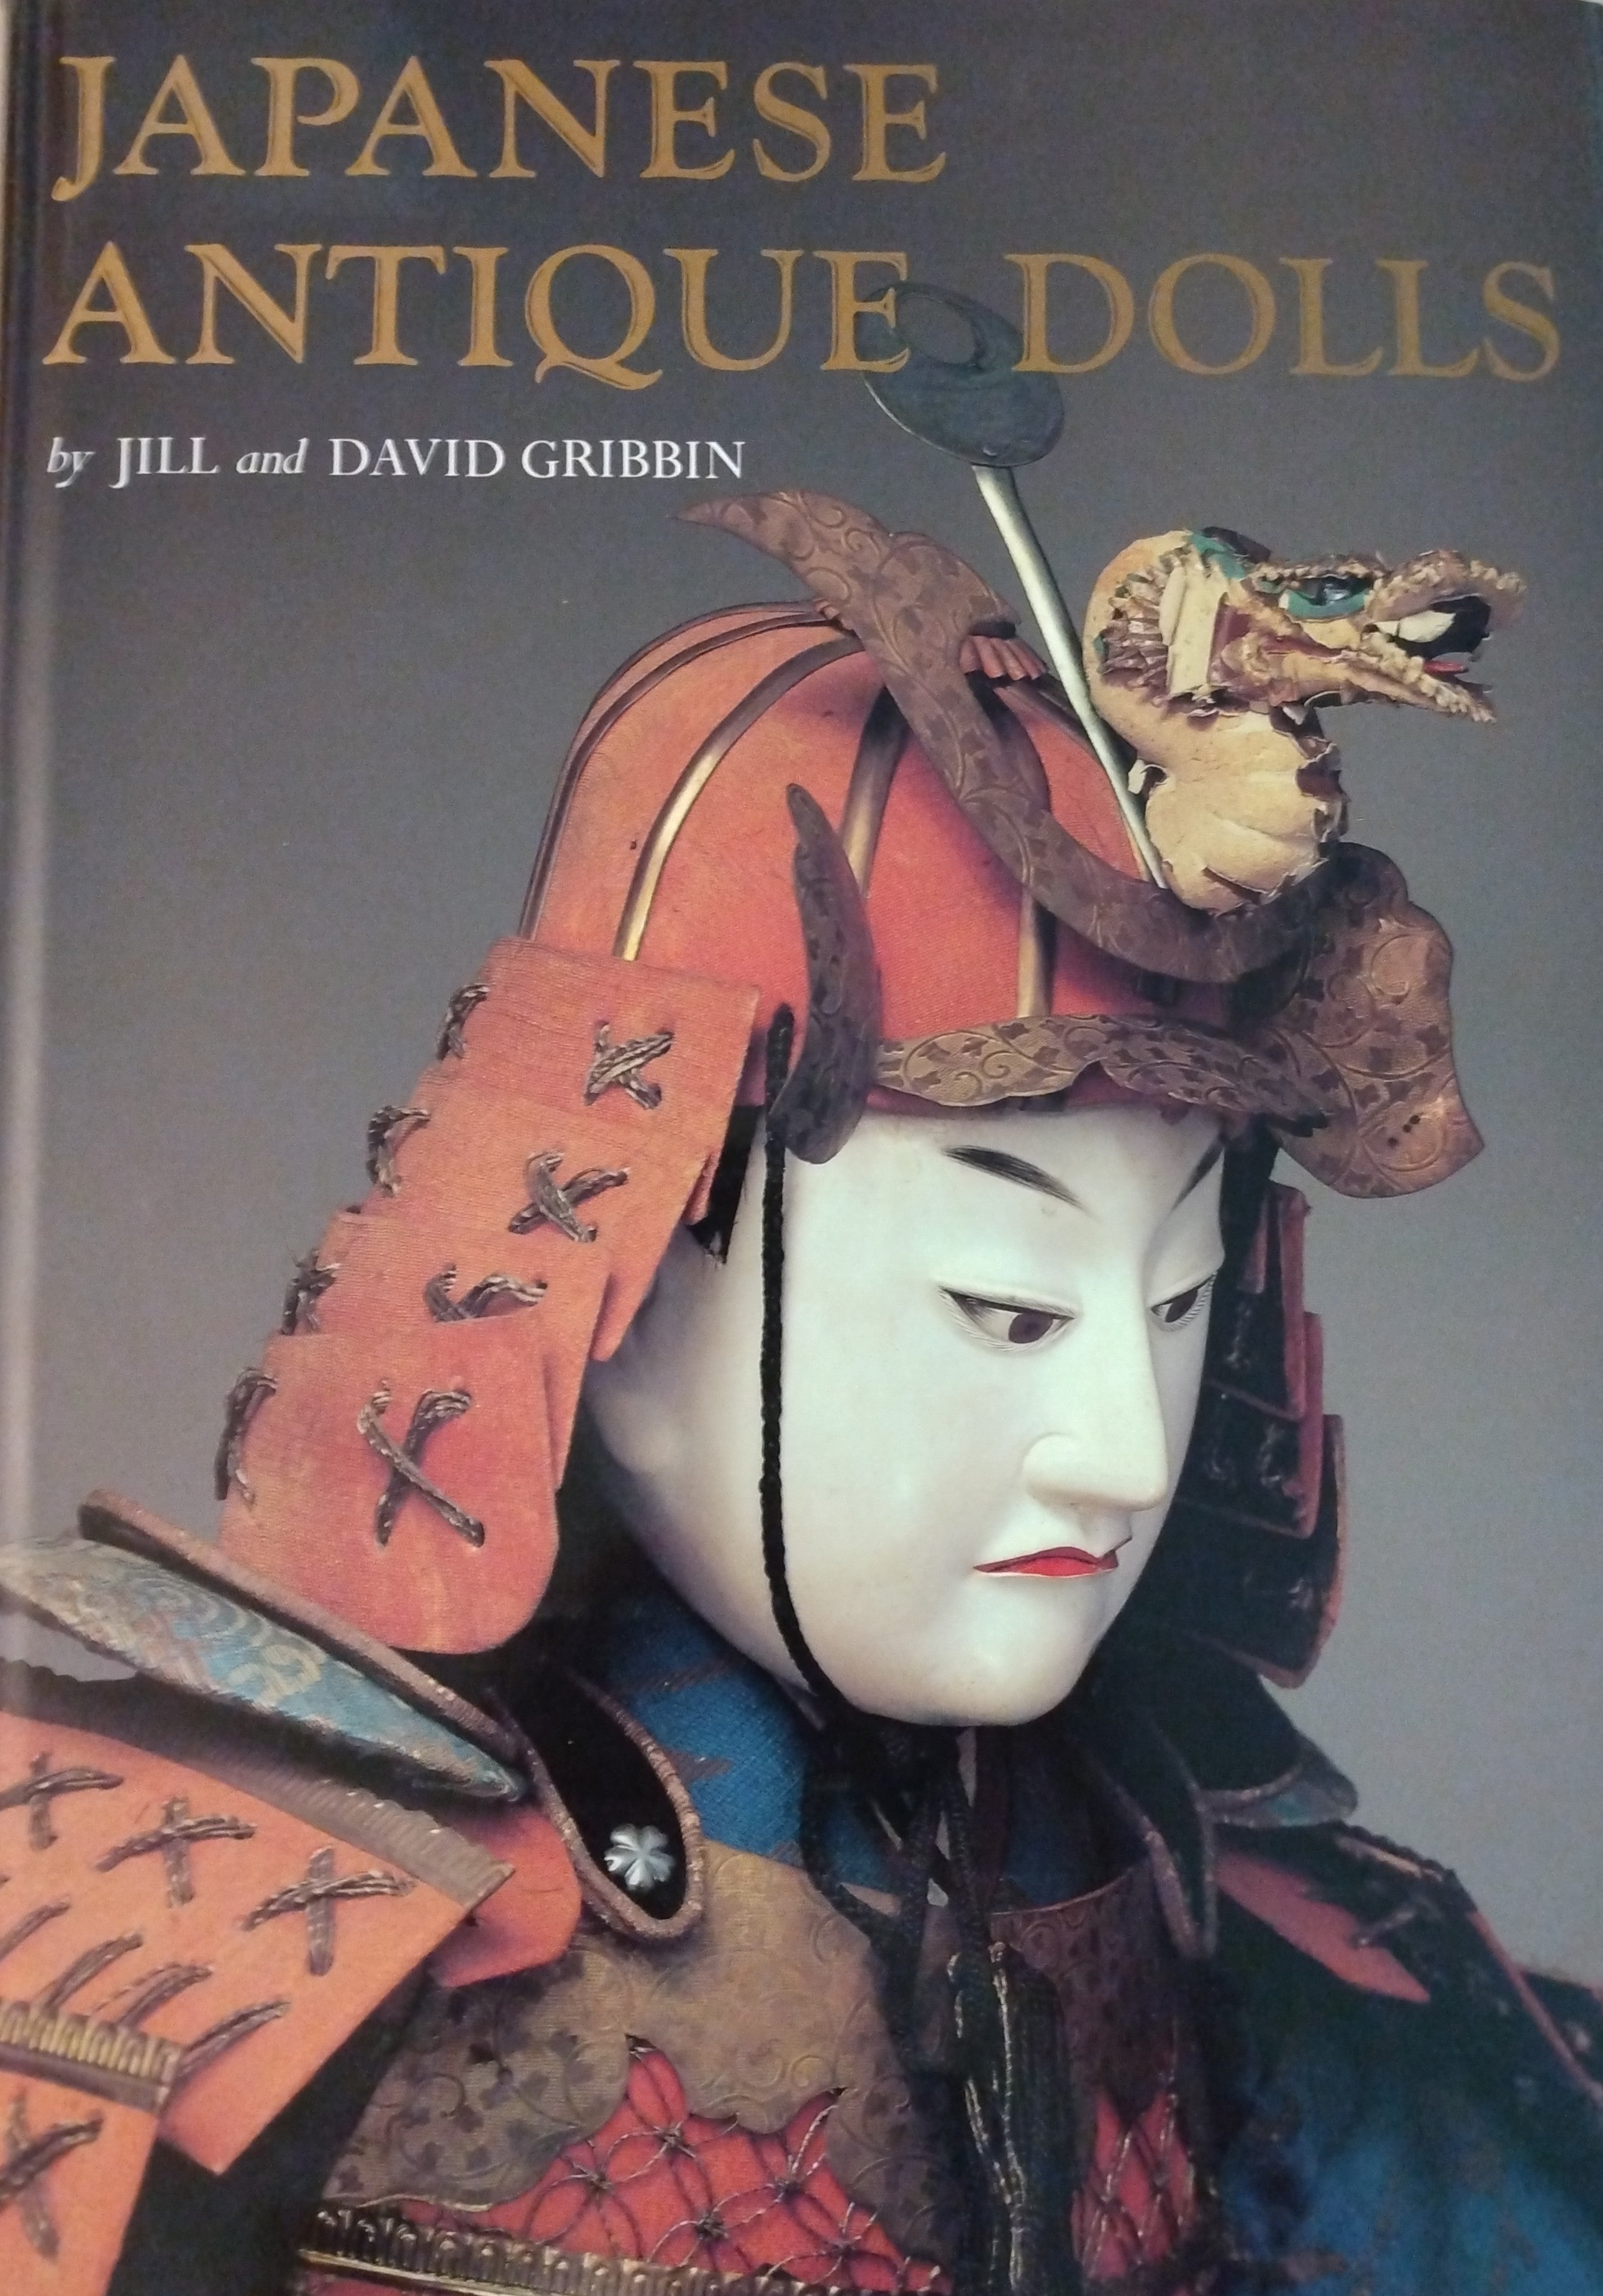 "Japanese Antique Dolls", by Jill and David Gribbin; Thiel Collection